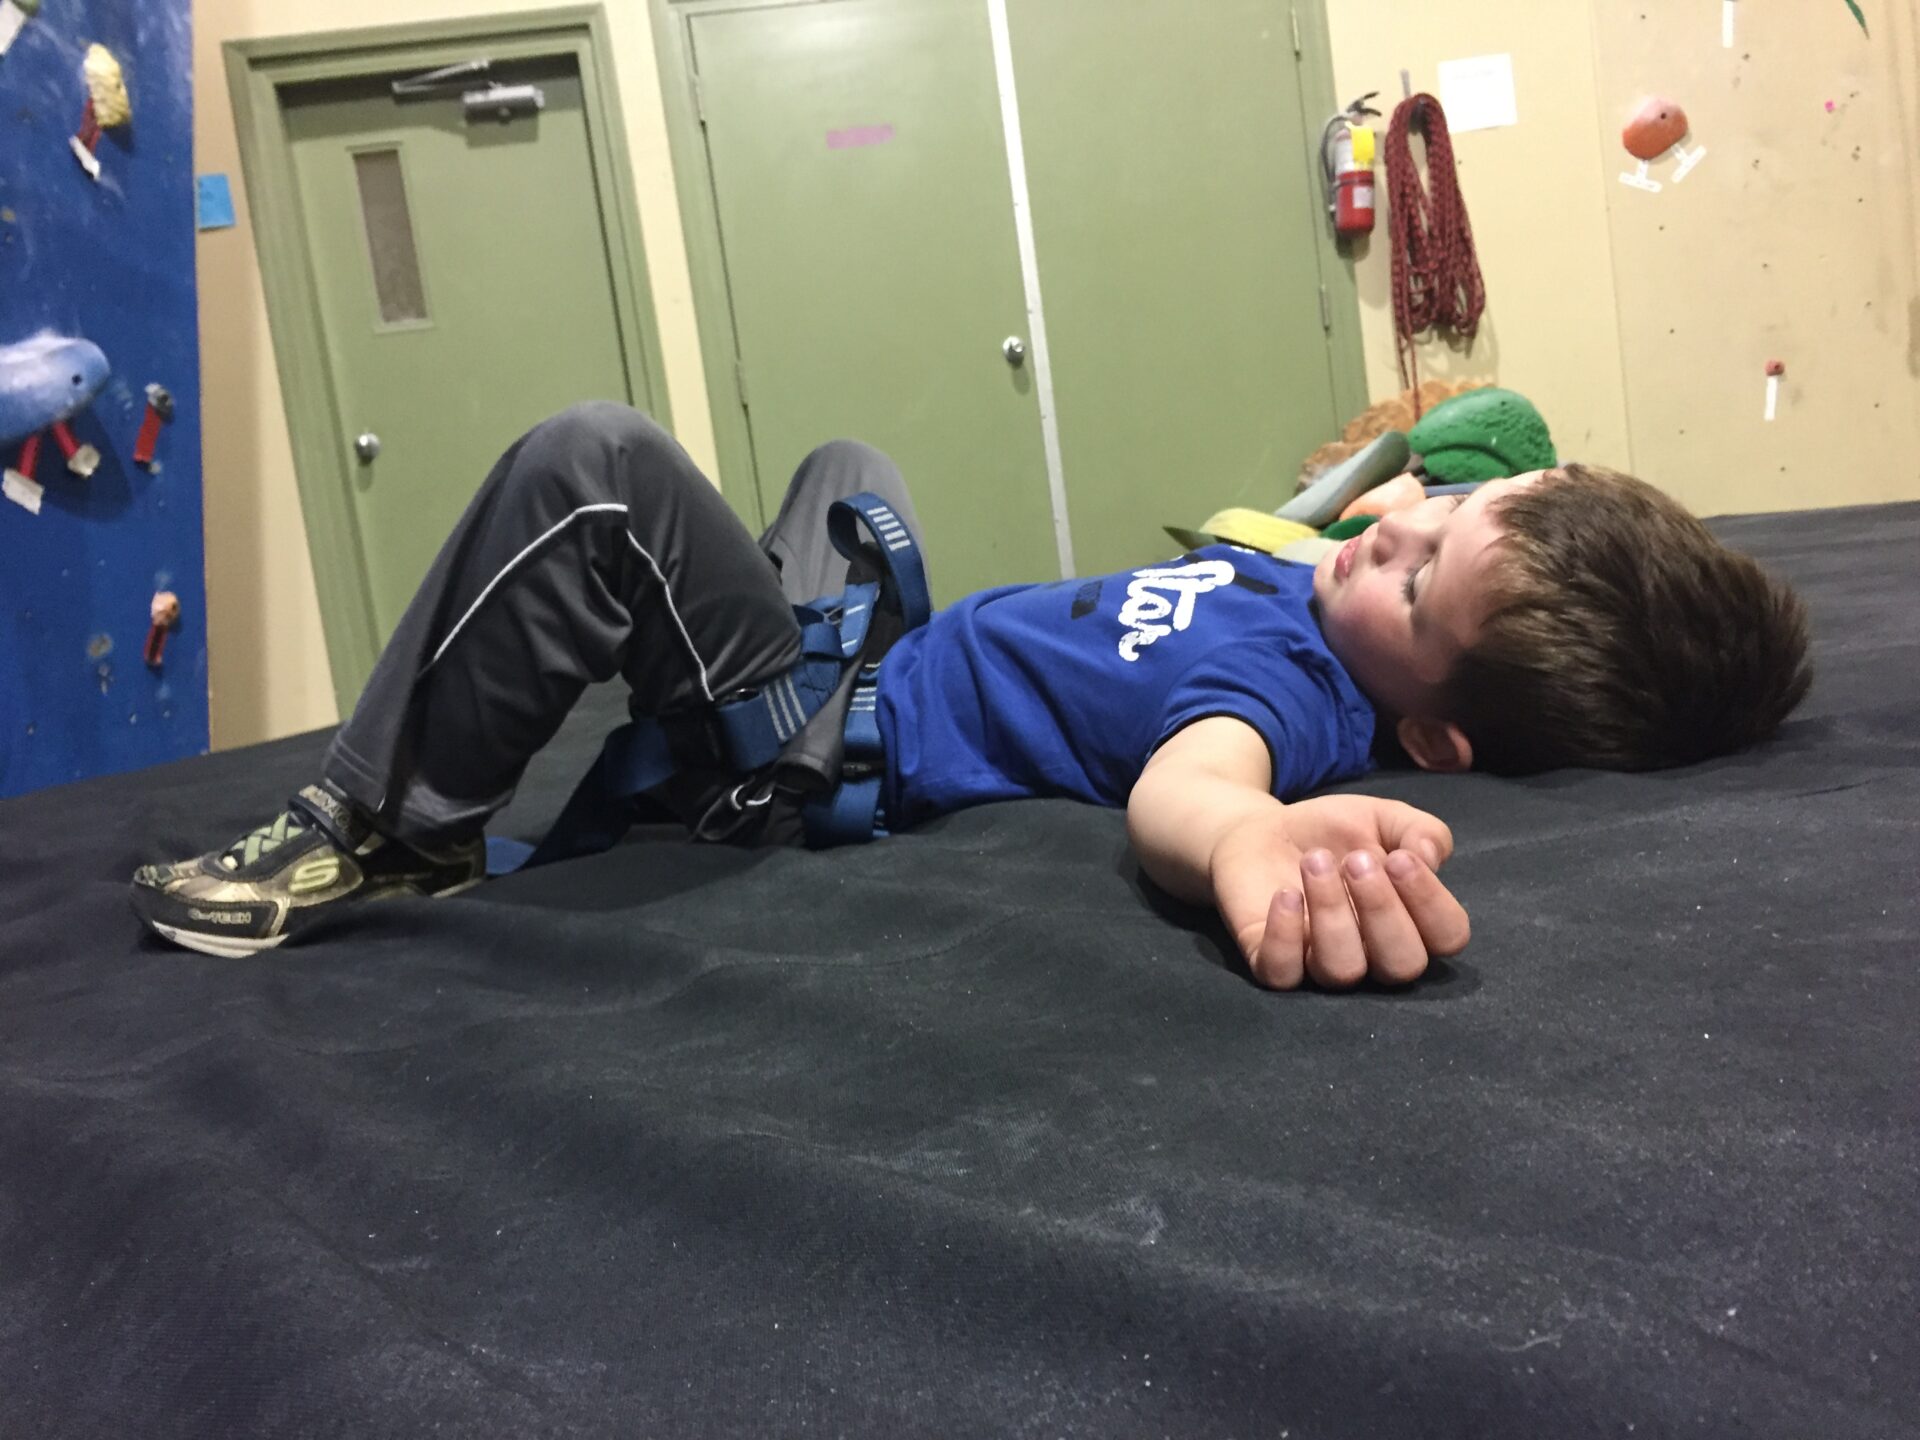 Project Climbing Center Abbotsford - Tired Boy with #ExploreBCbyBus